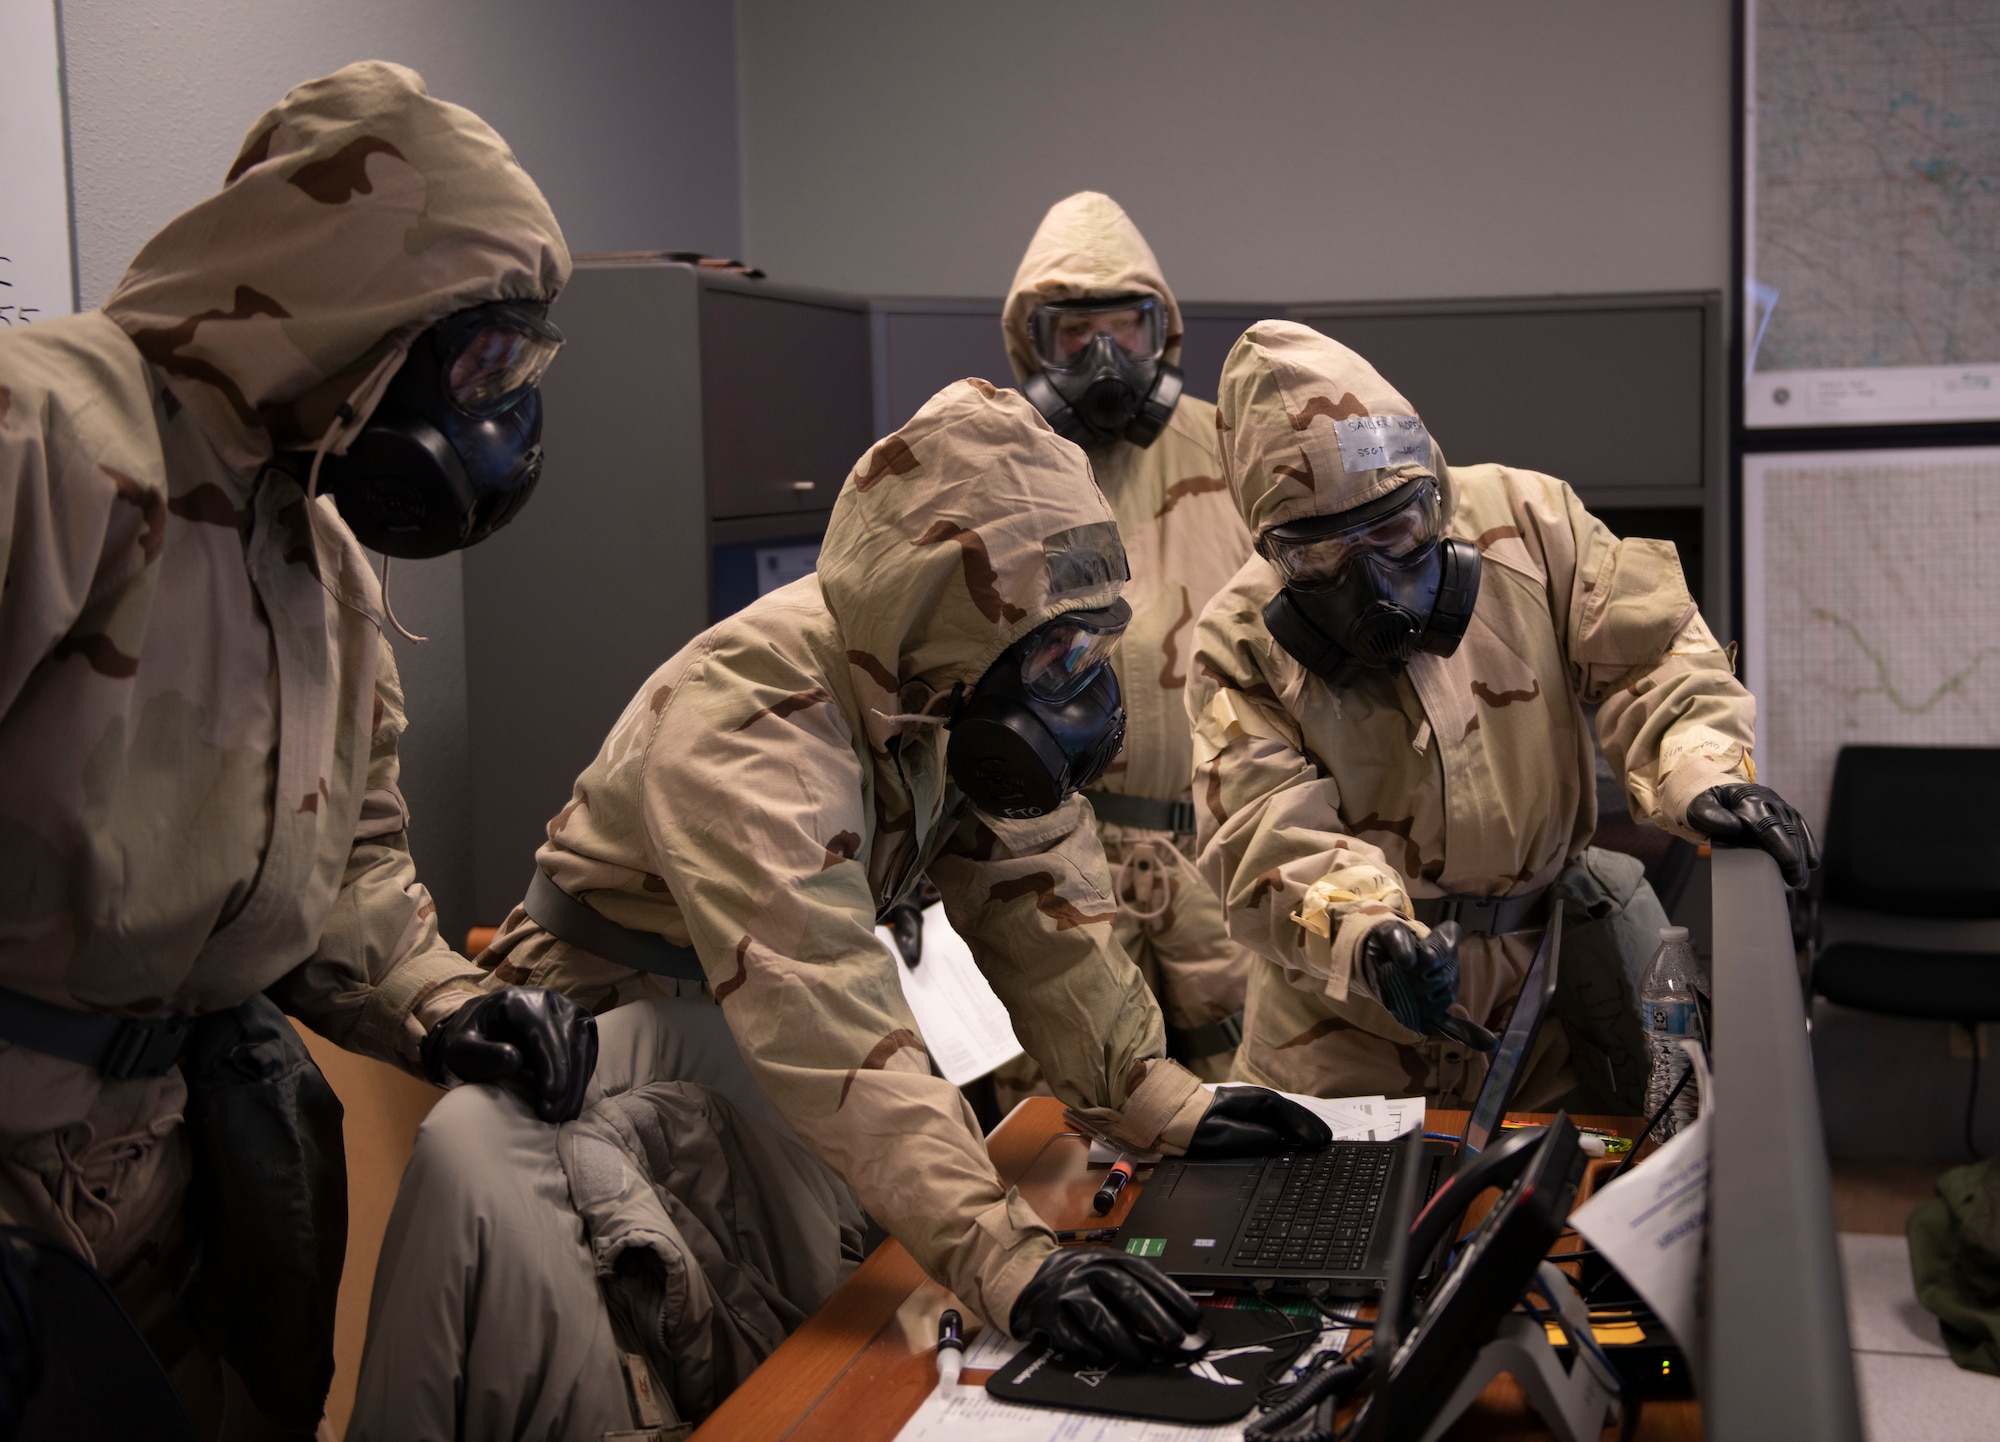 Four people in chemical gear look at a computer.